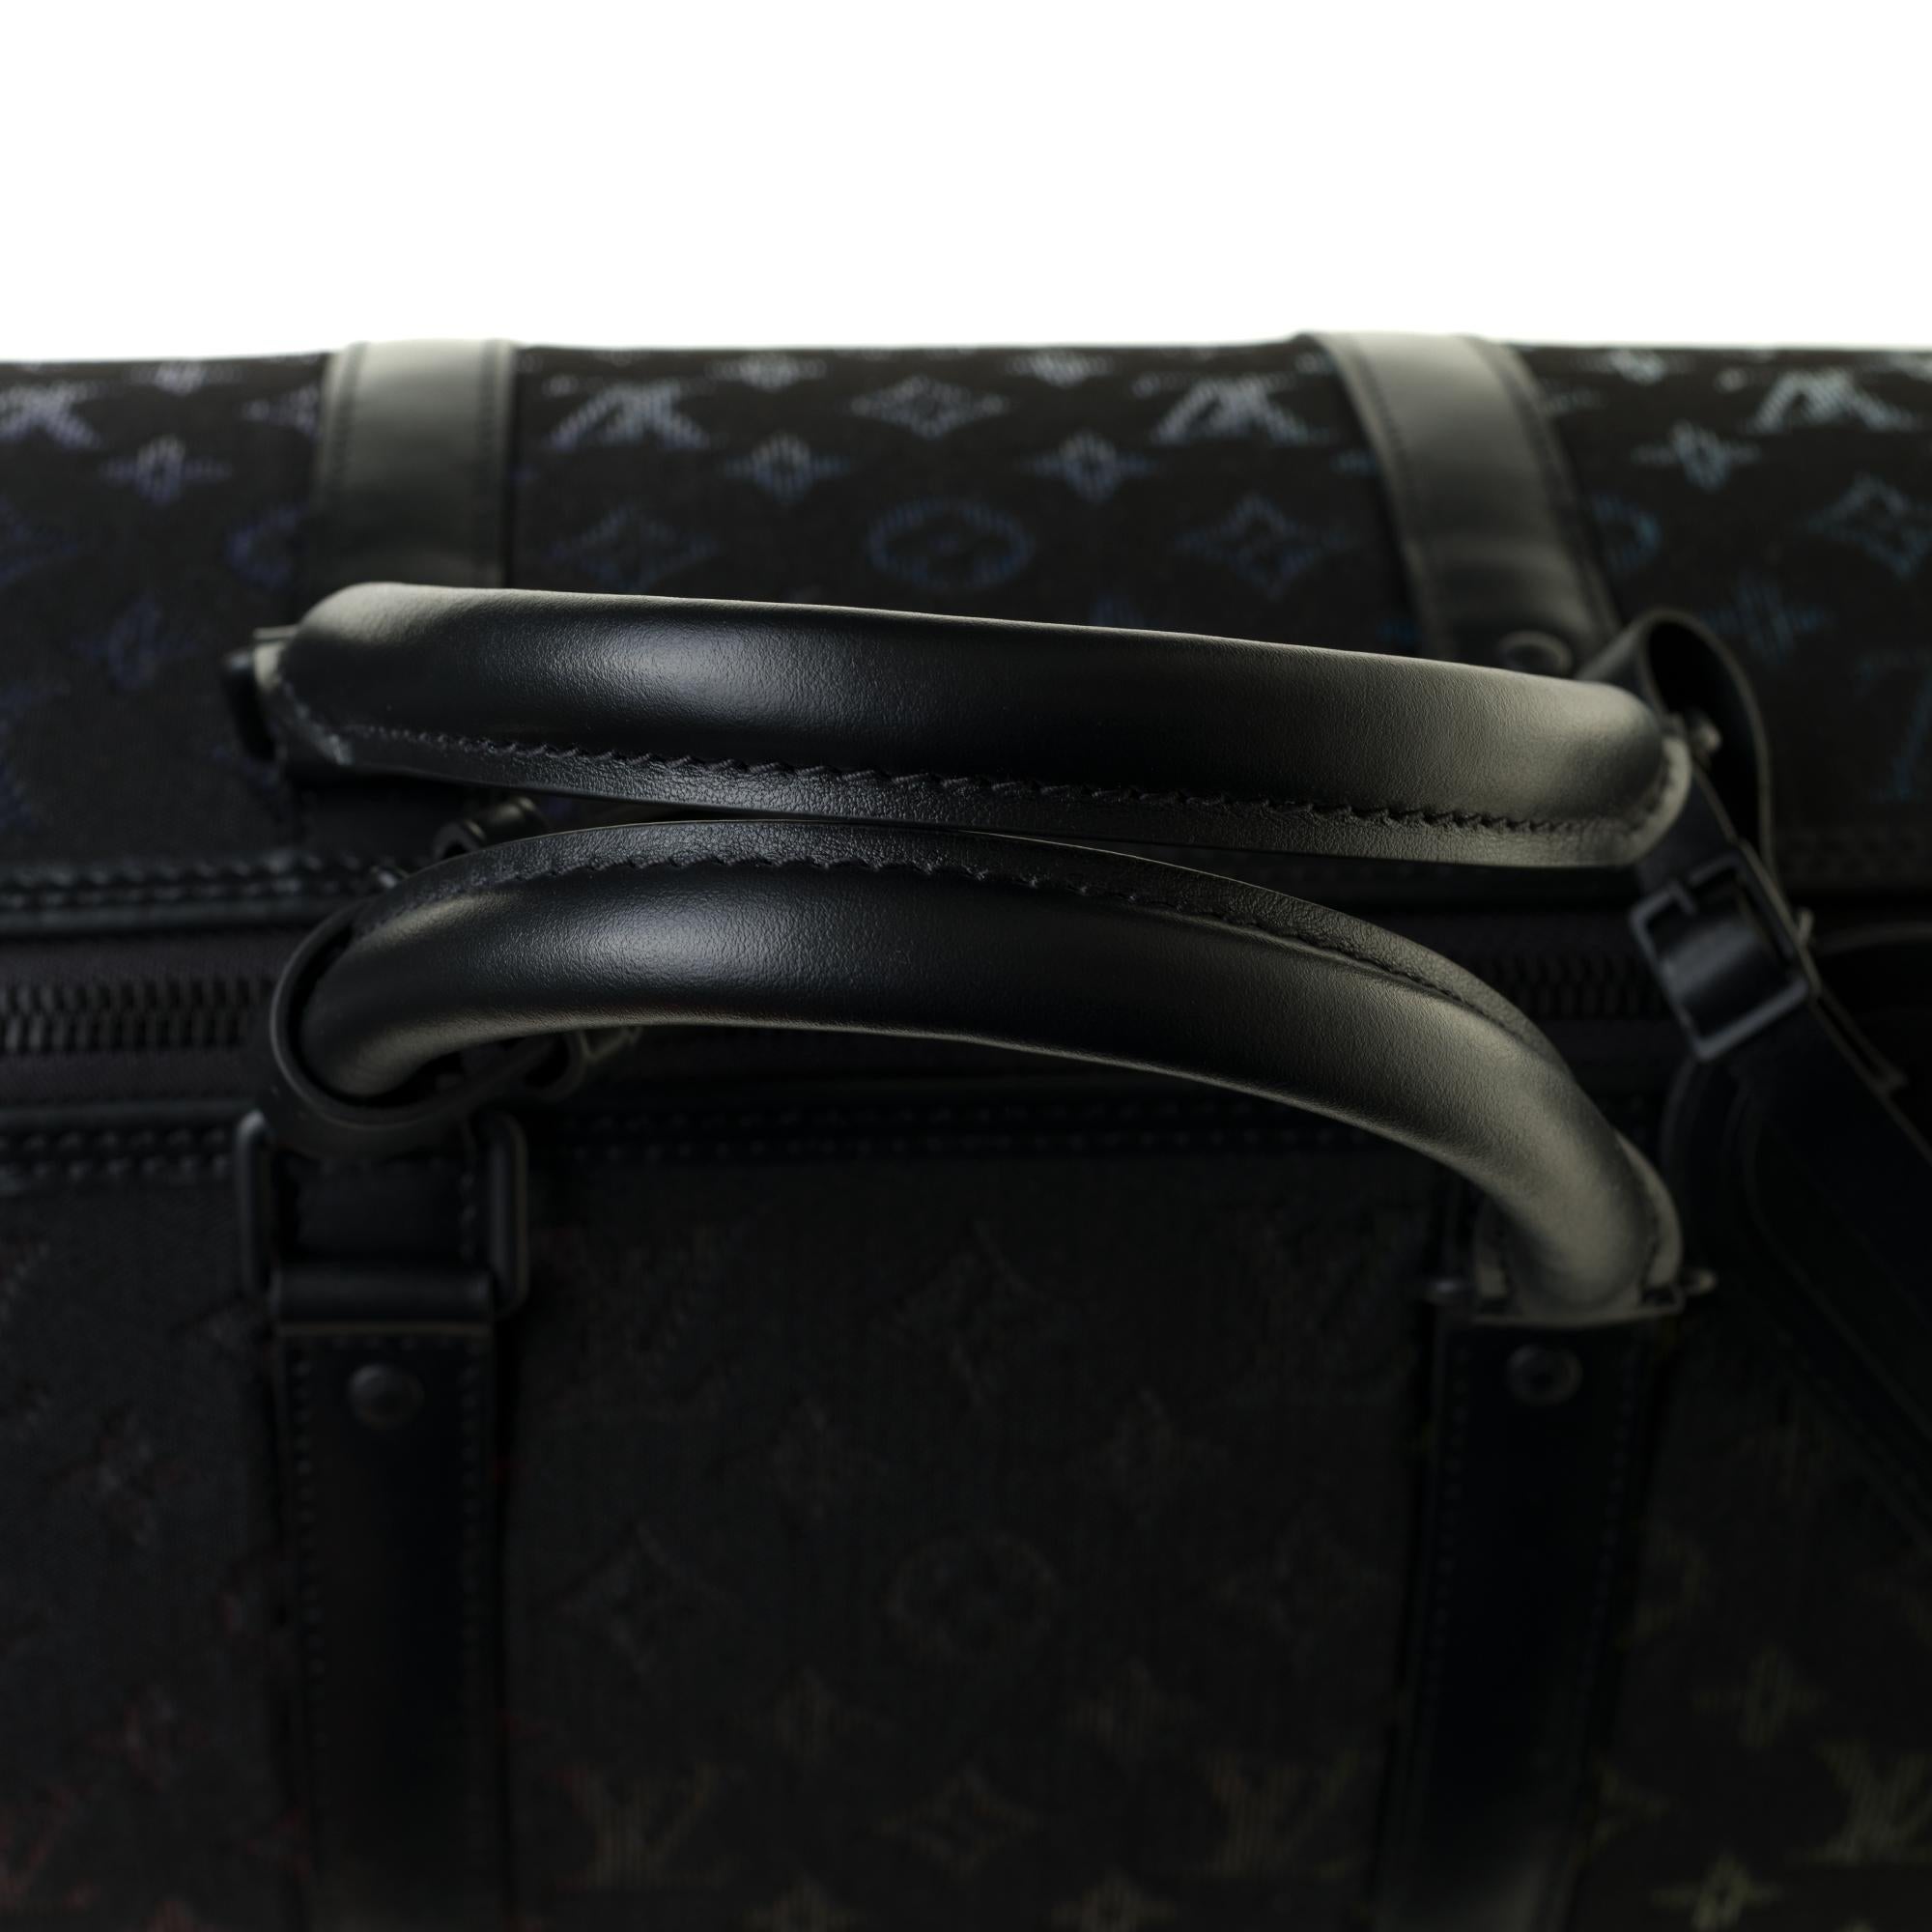 BRAND NEW-Limited edition Louis Vuitton keepall 50 Light Up virgil abloh fw19 4